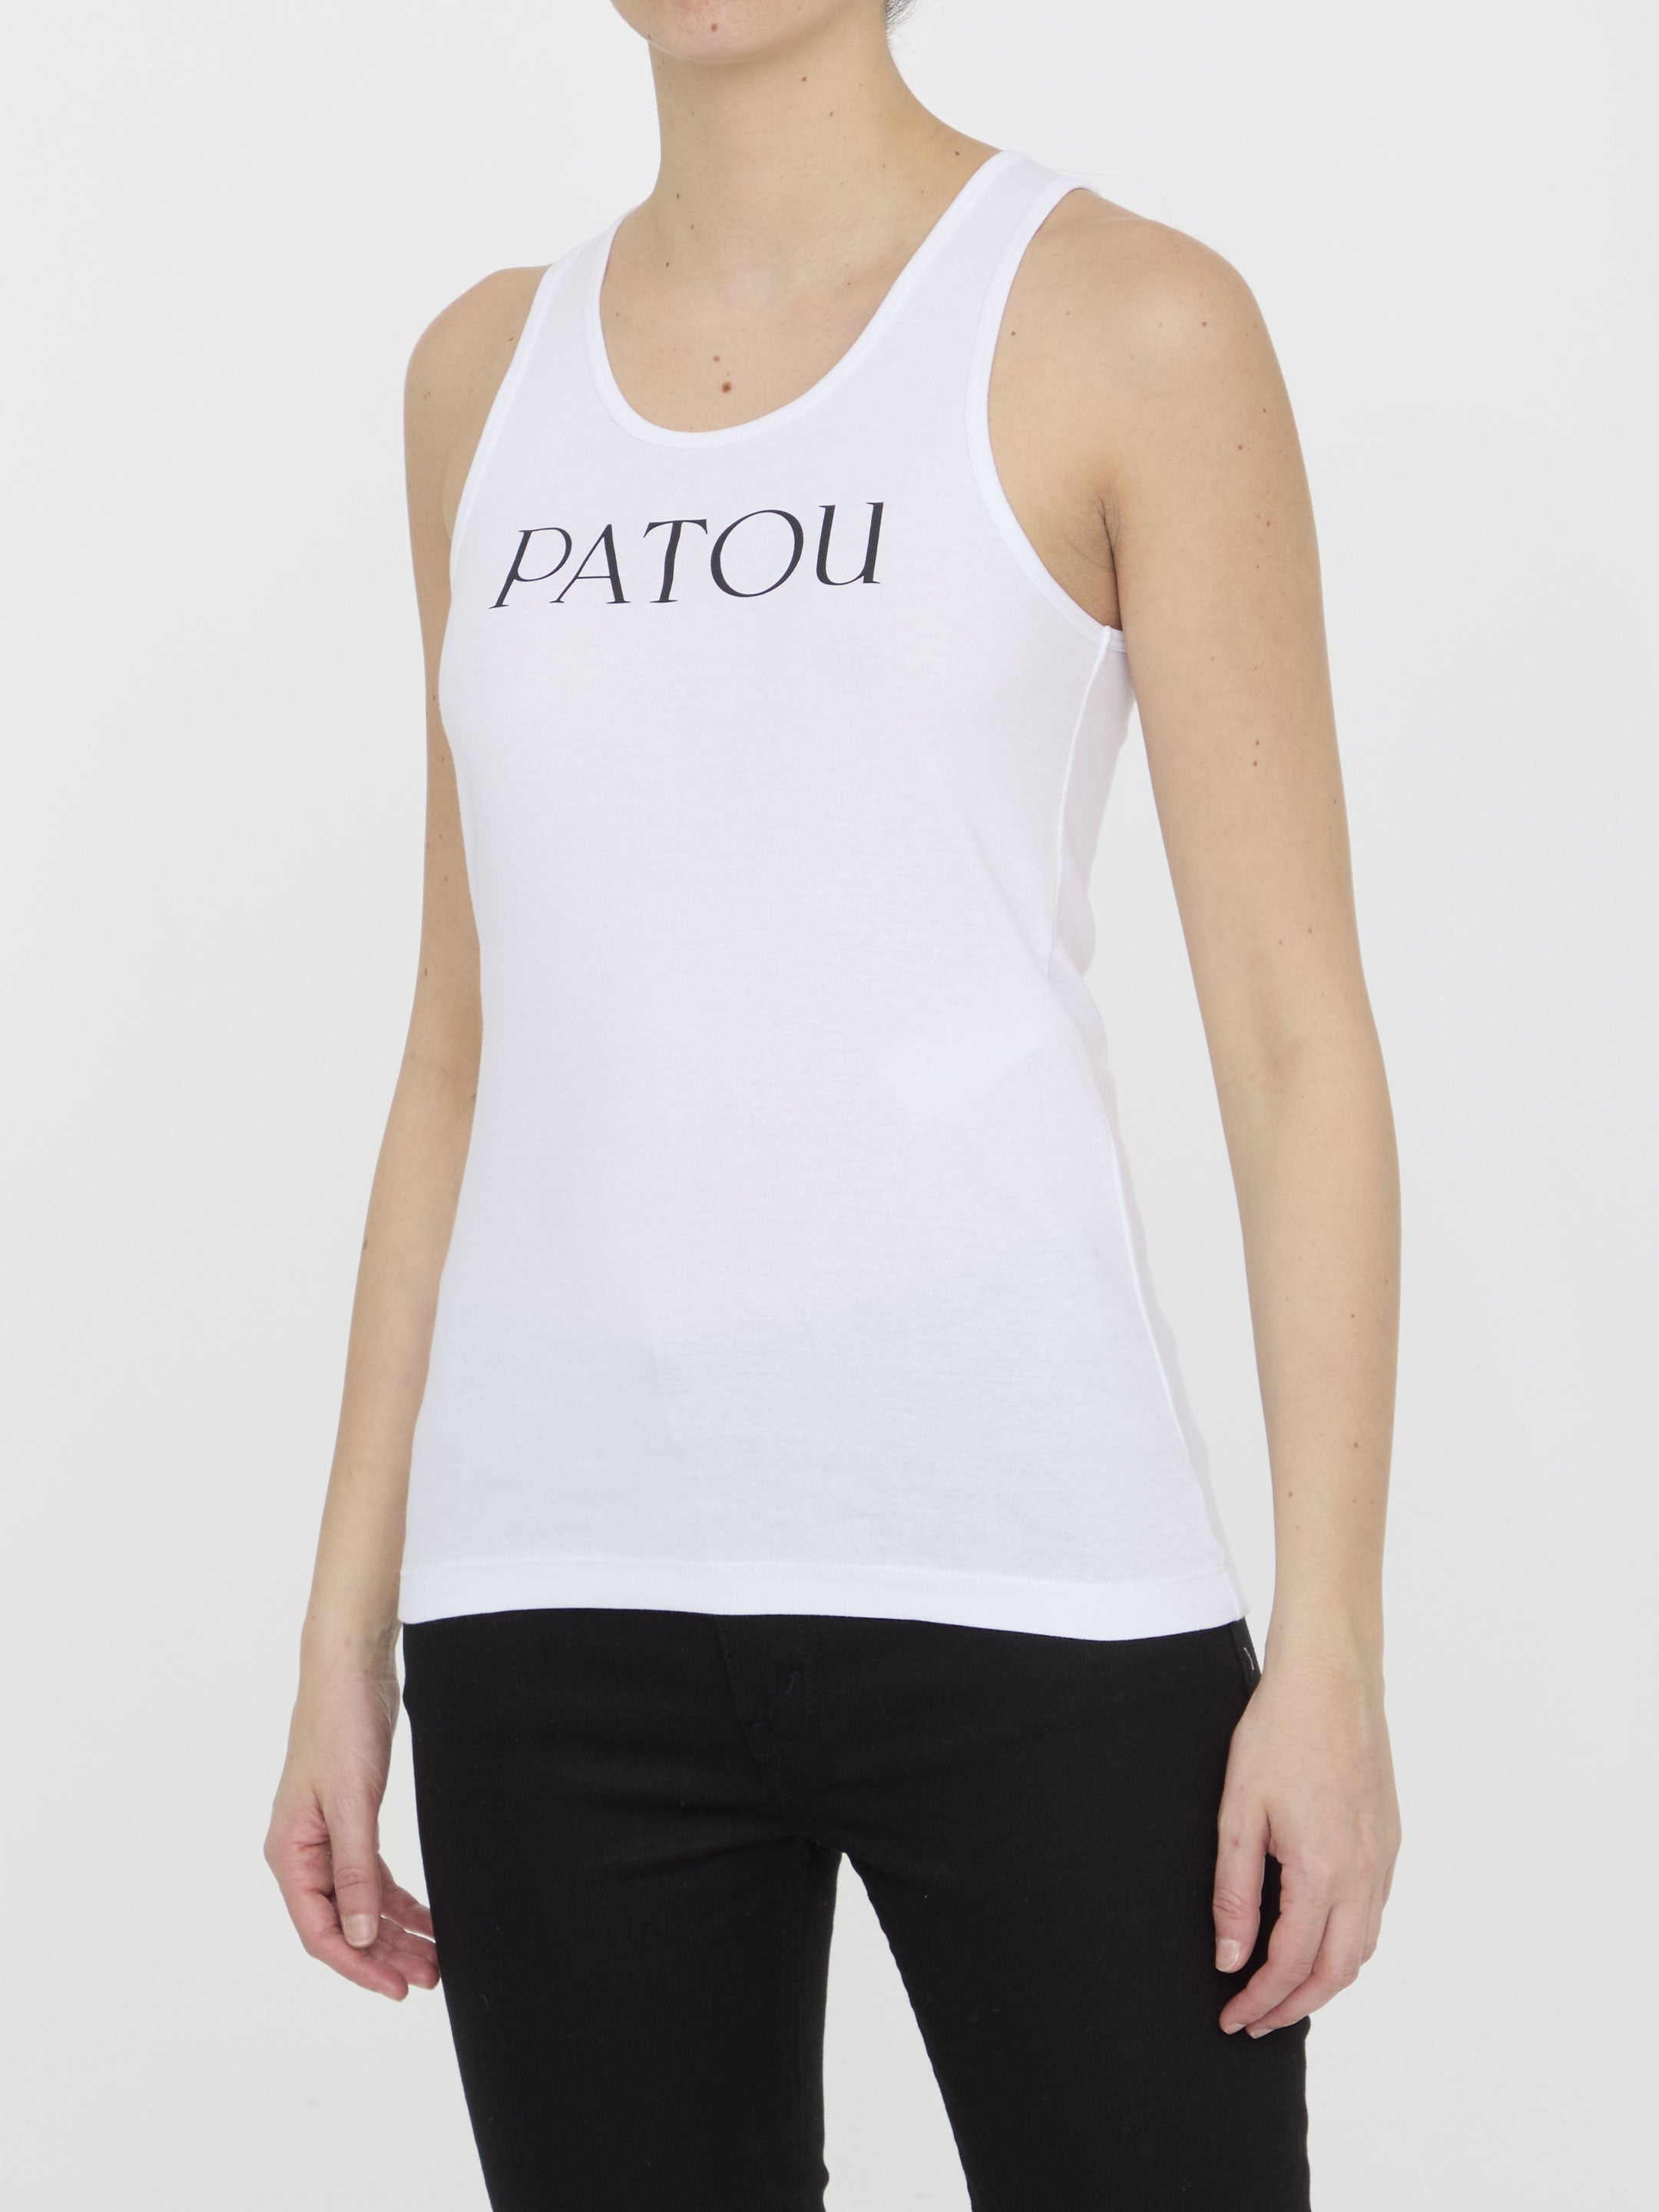 PATOU-OUTLET-SALE-Iconic-tank-top-Shirts-ARCHIVE-COLLECTION-2_b357cb65-8be4-4c21-88c2-6a415a70ddc8.jpg